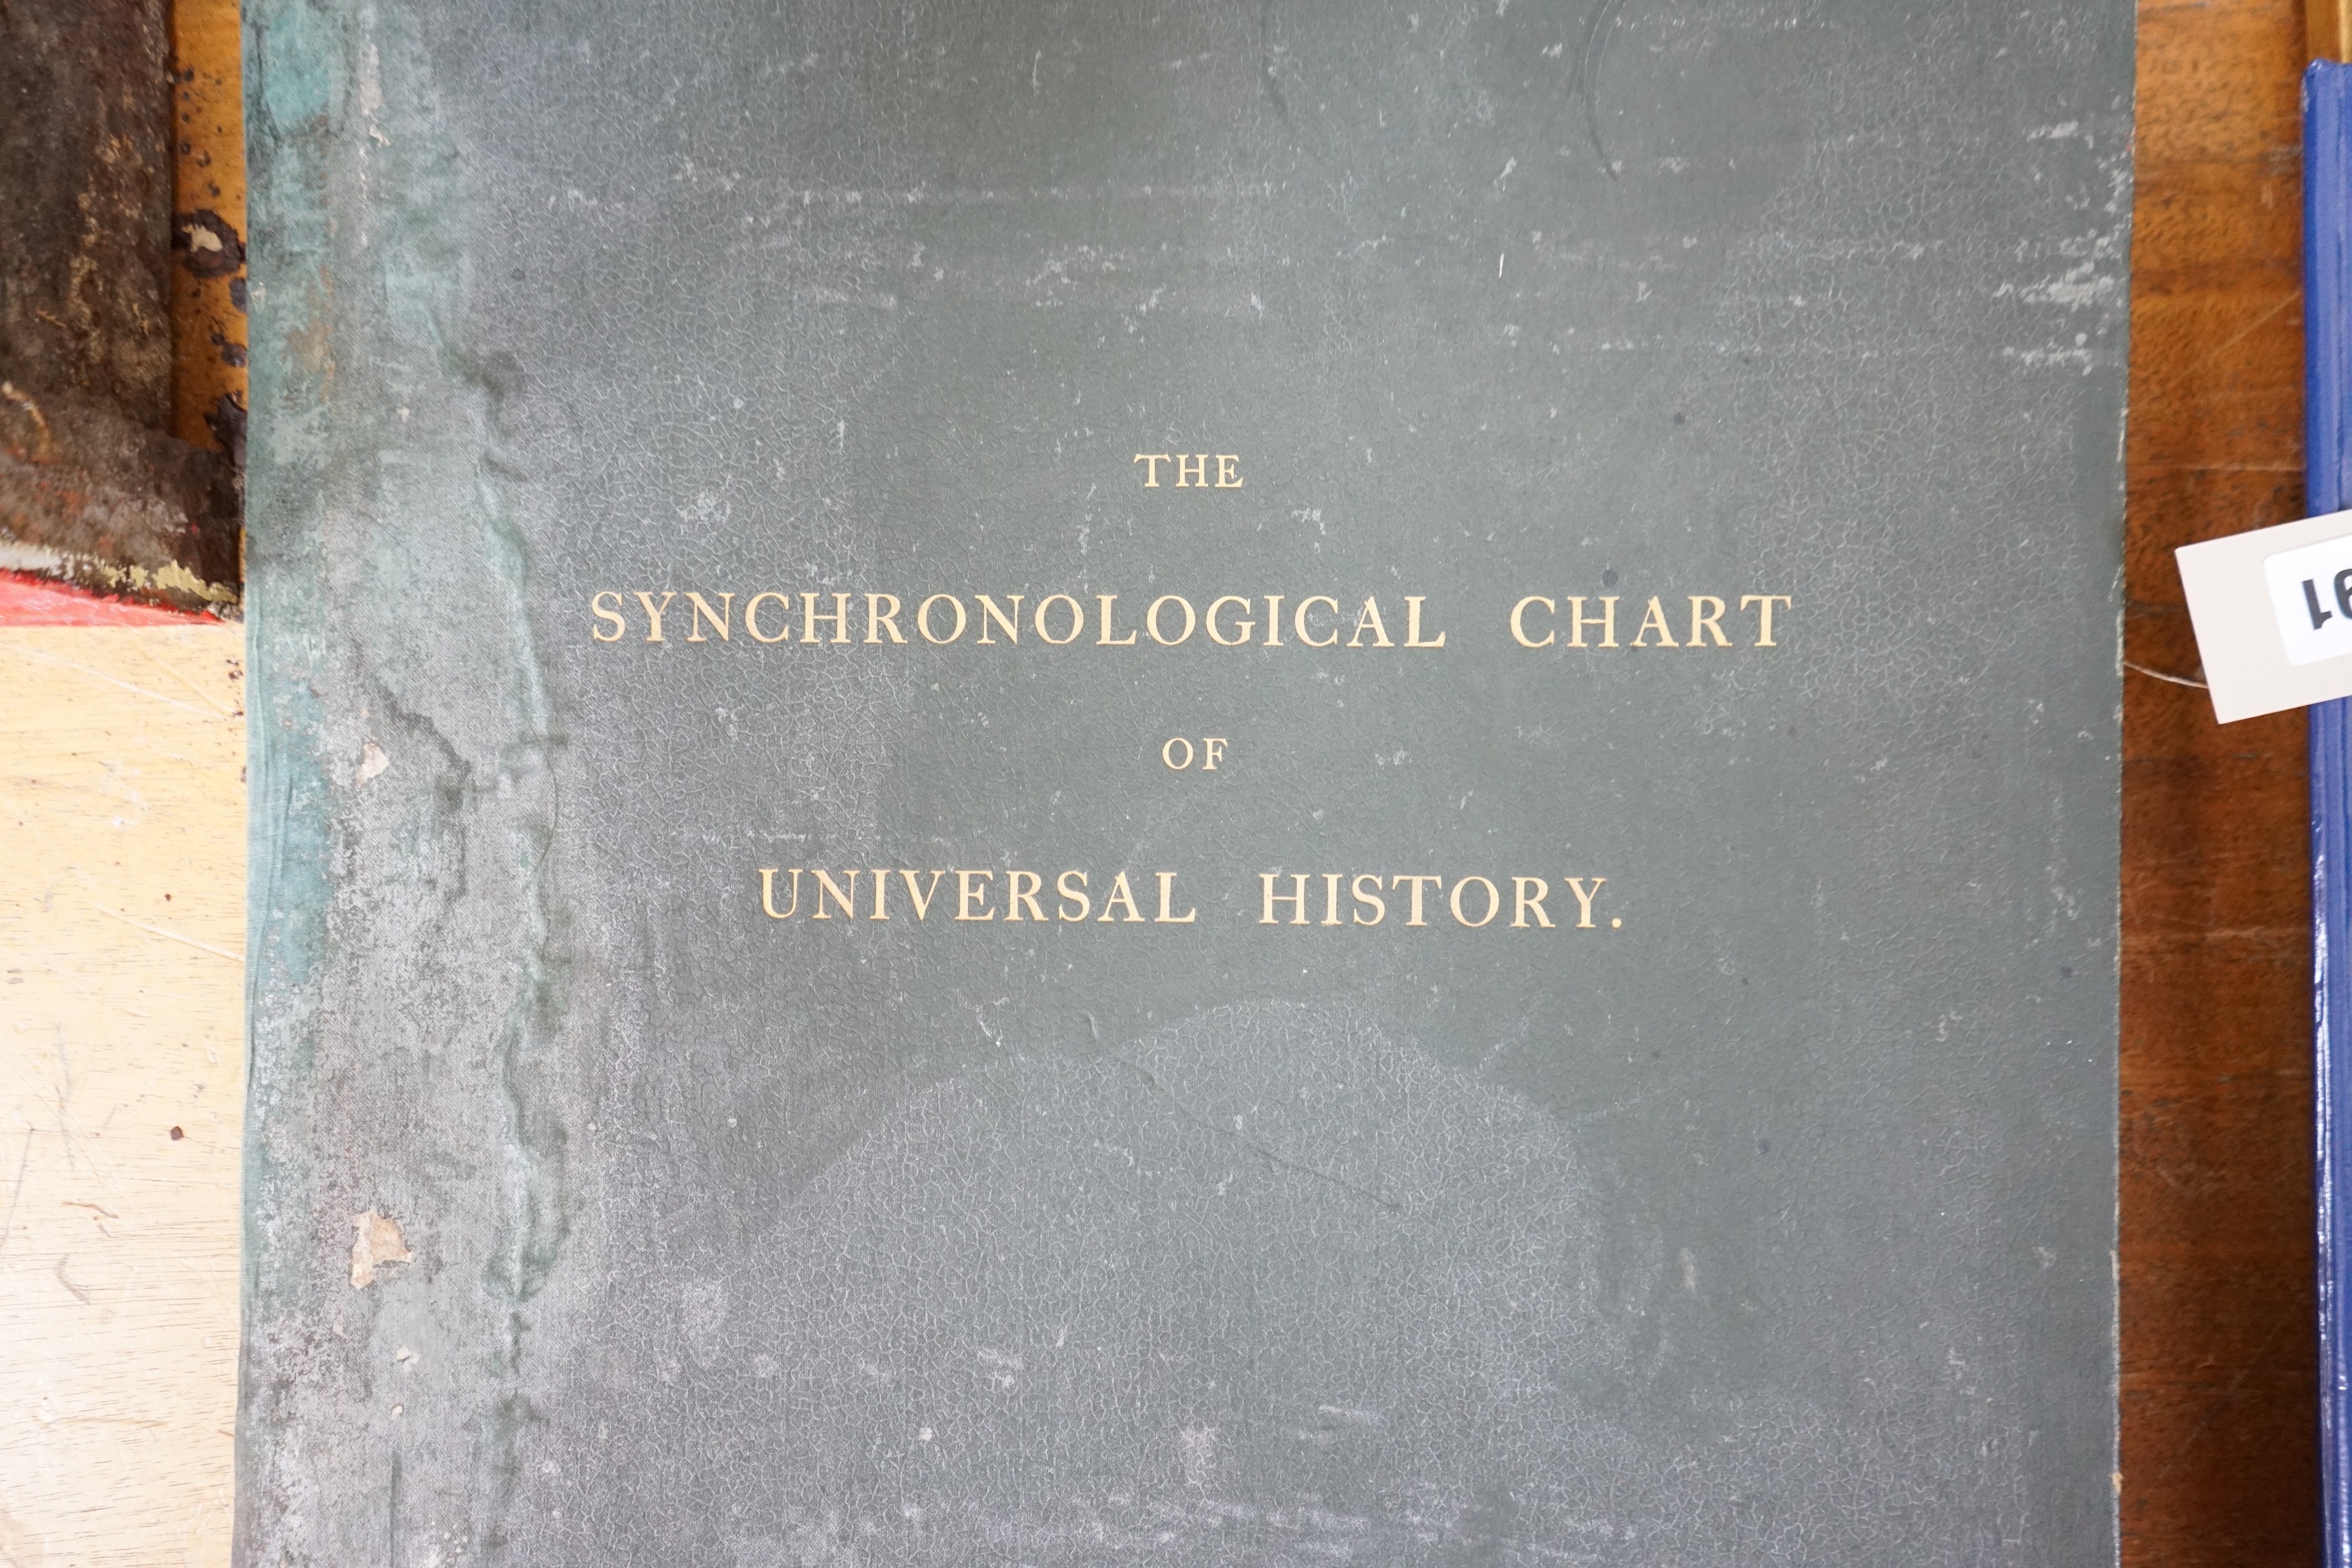 Synchronolgical chart of universal history and a modern equivalent